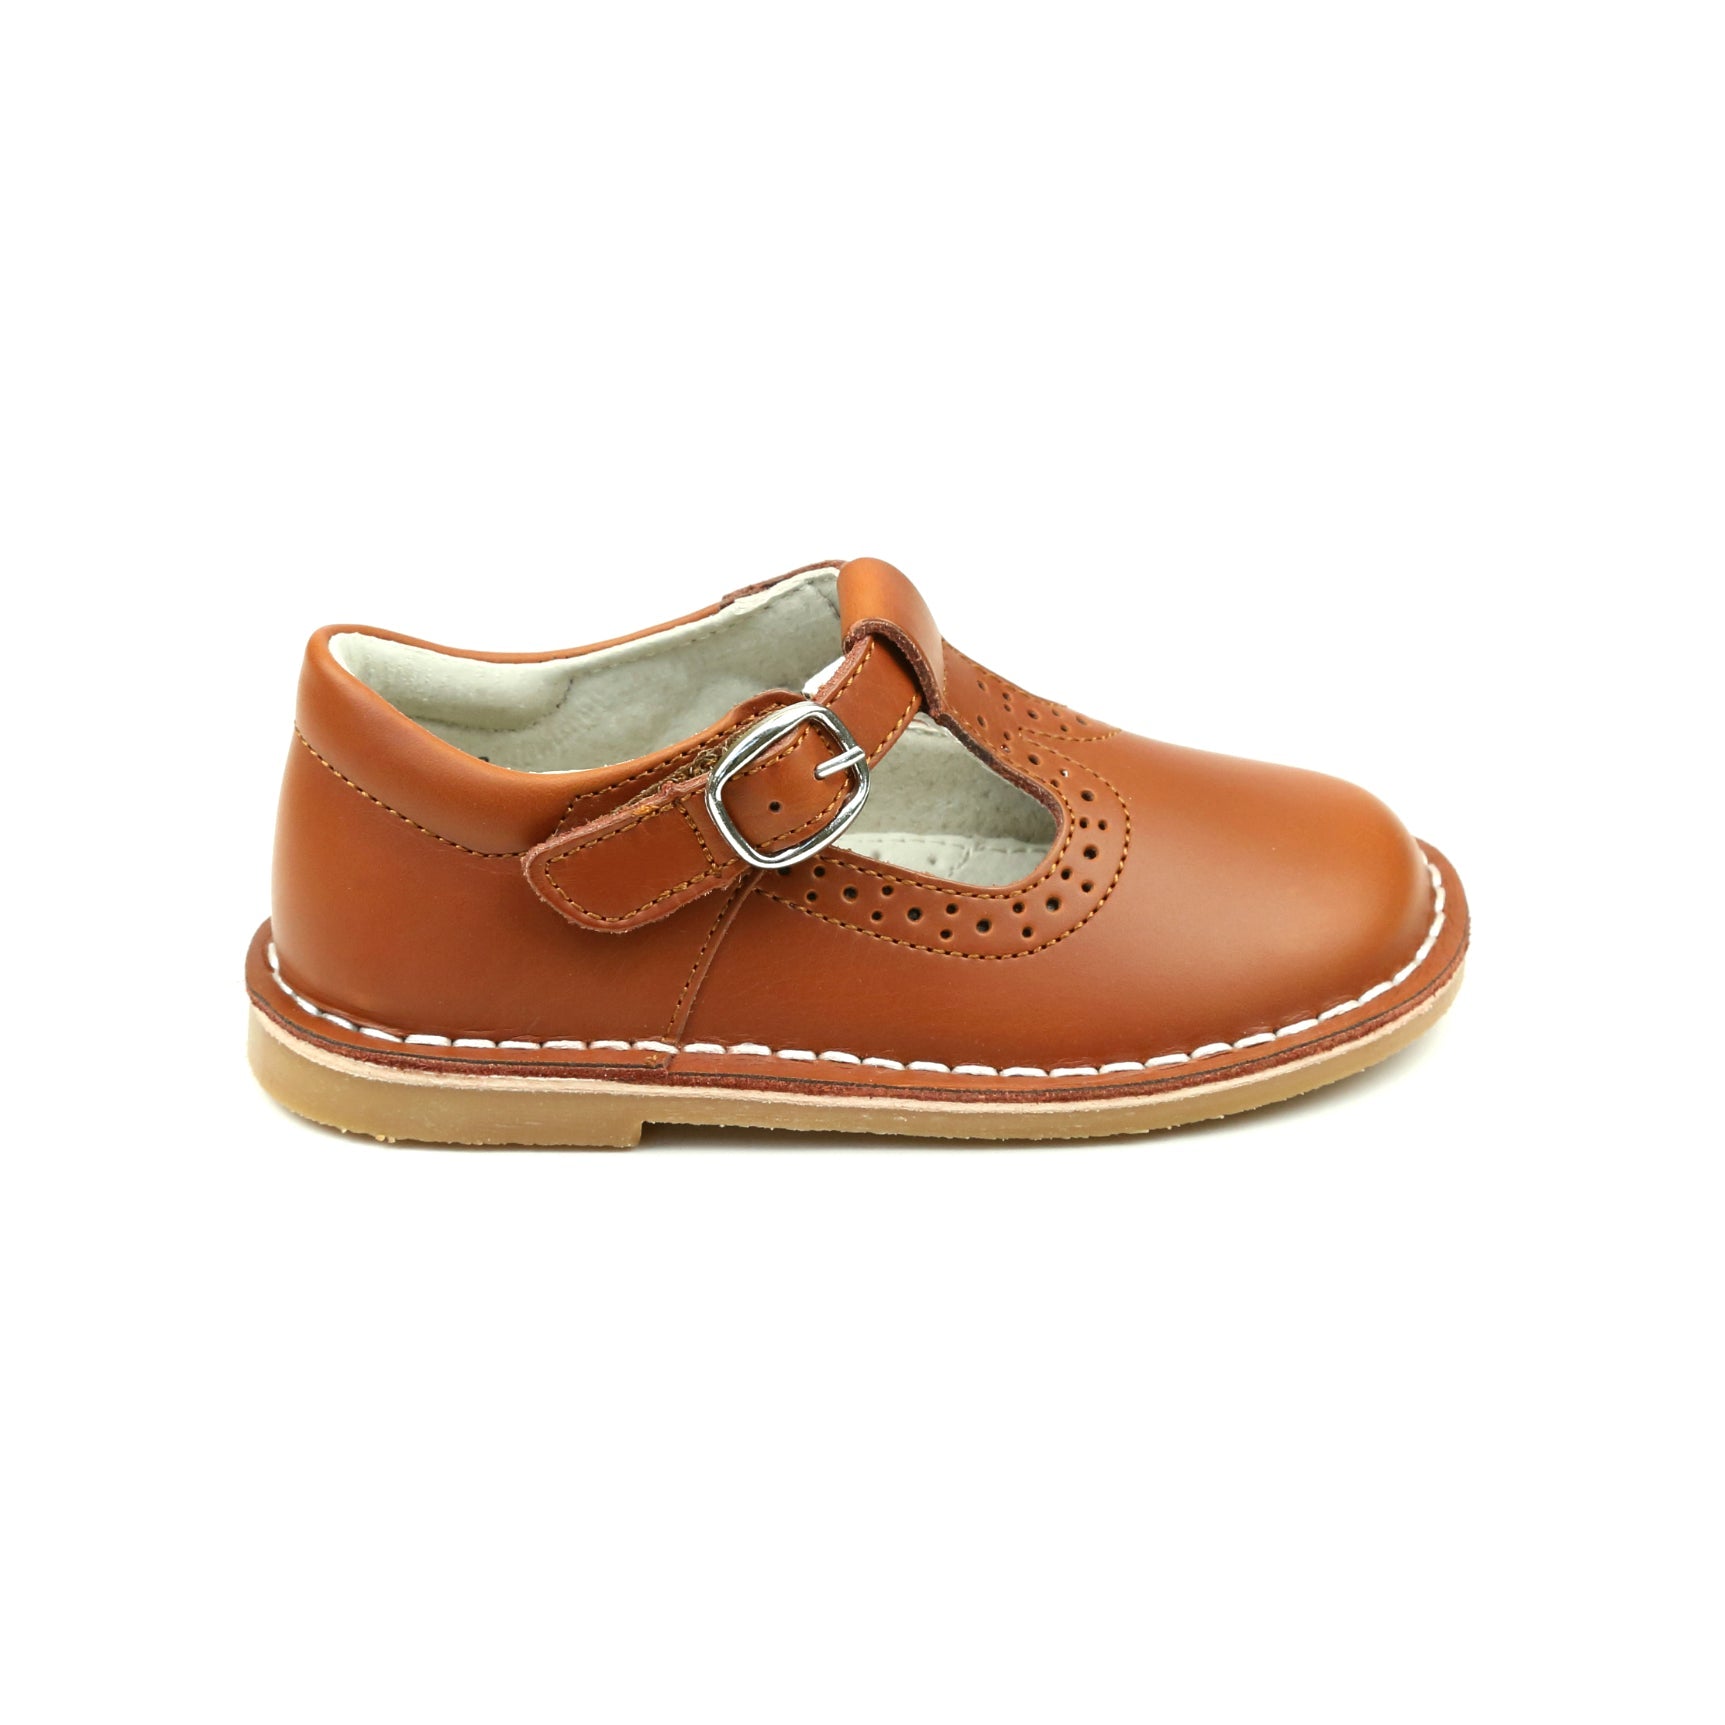 L'Amour Frances Cognac T-Strap Perforated Mary Jane Mary Janes